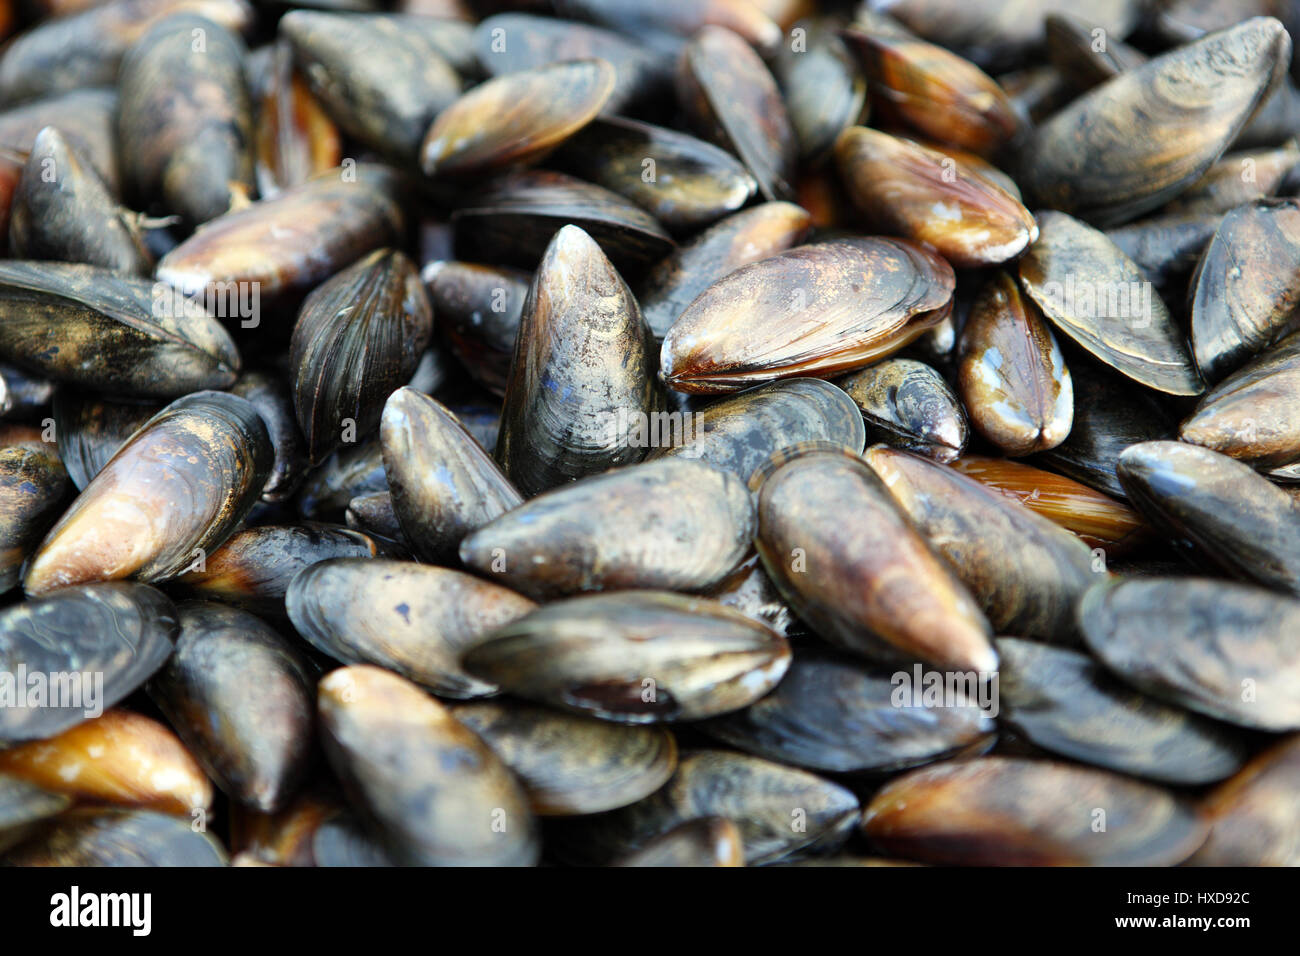 Mussels washed and cleaned ready for cooking Stock Photo